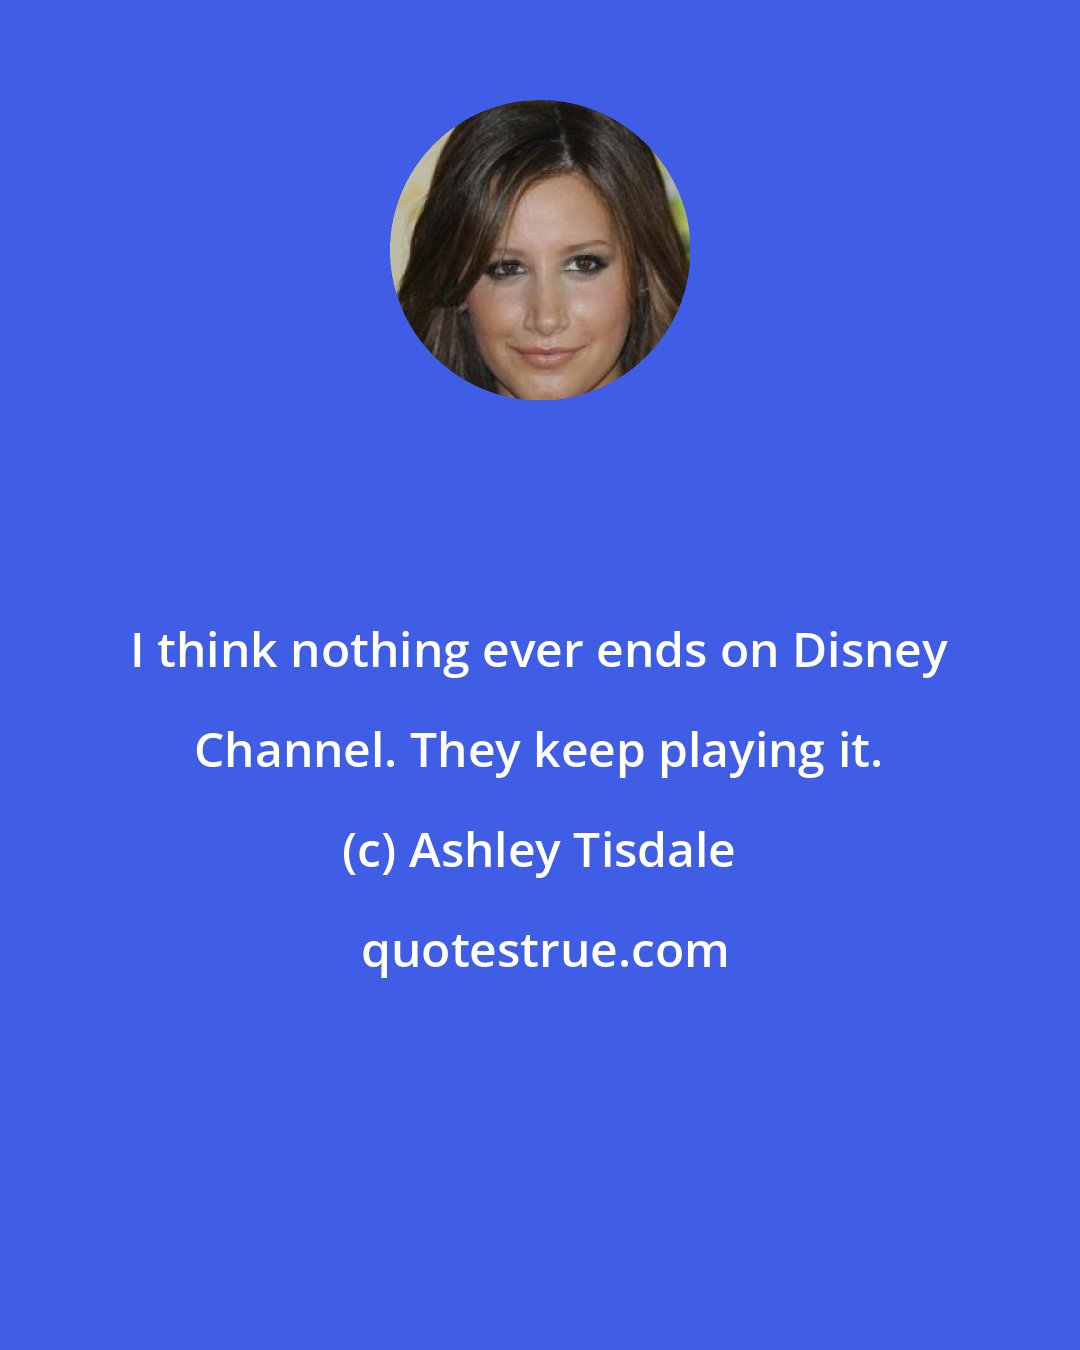 Ashley Tisdale: I think nothing ever ends on Disney Channel. They keep playing it.